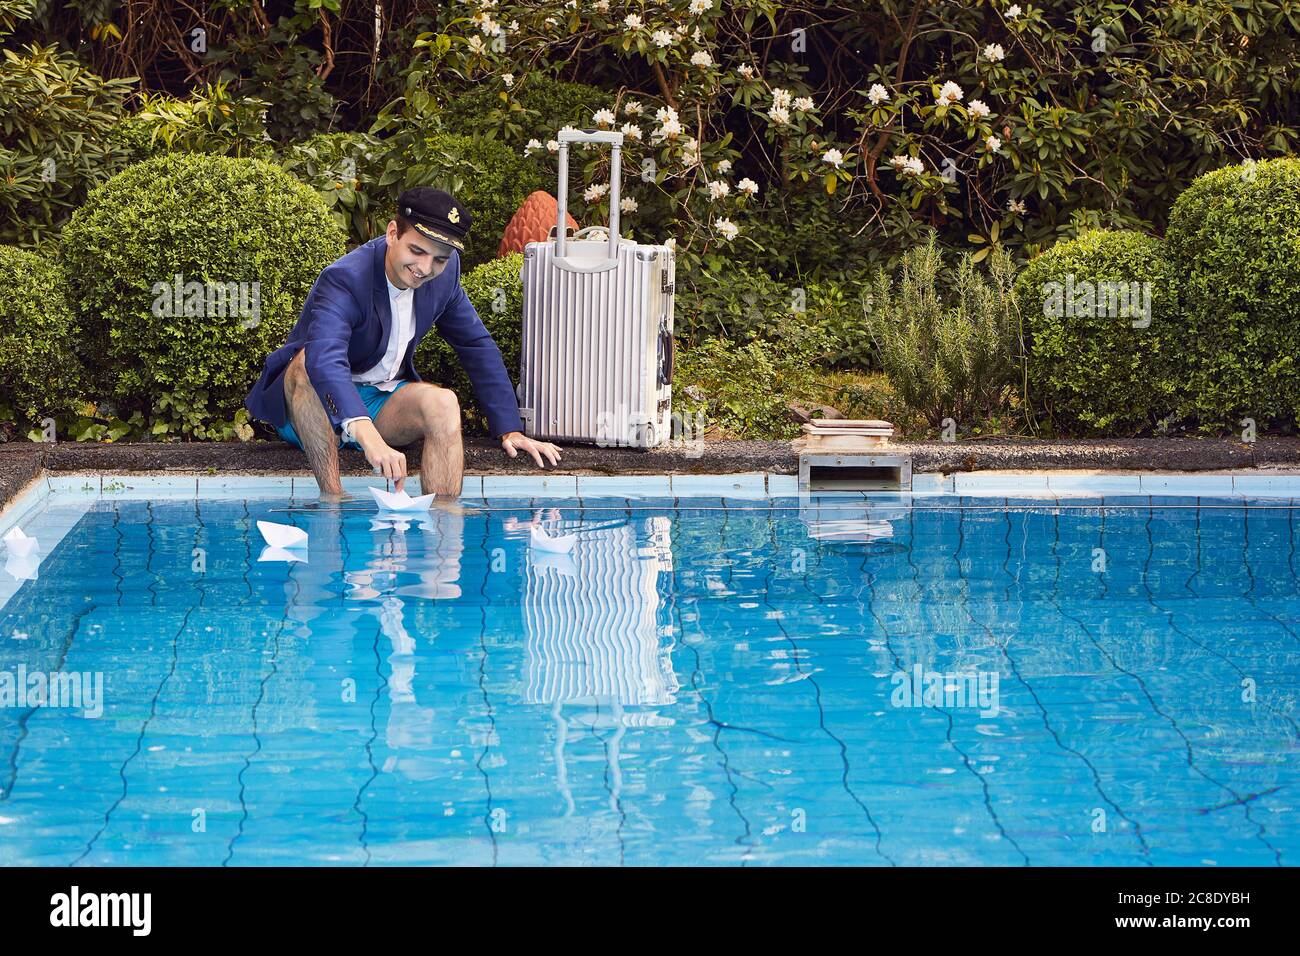 Man floating paper boats on swimming pool while sitting with suitcase against plants in yard Stock Photo